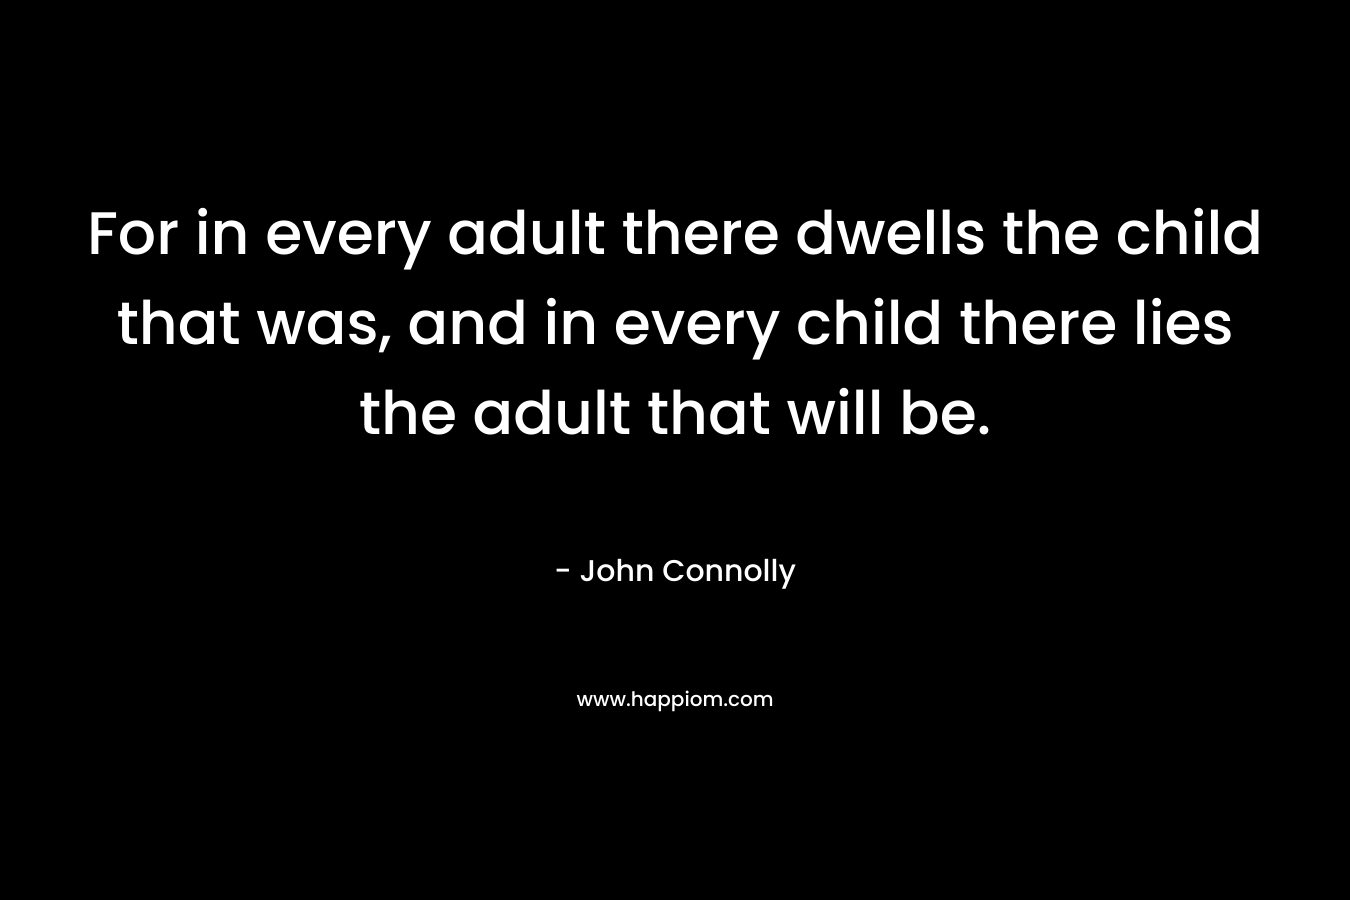 For in every adult there dwells the child that was, and in every child there lies the adult that will be. – John Connolly